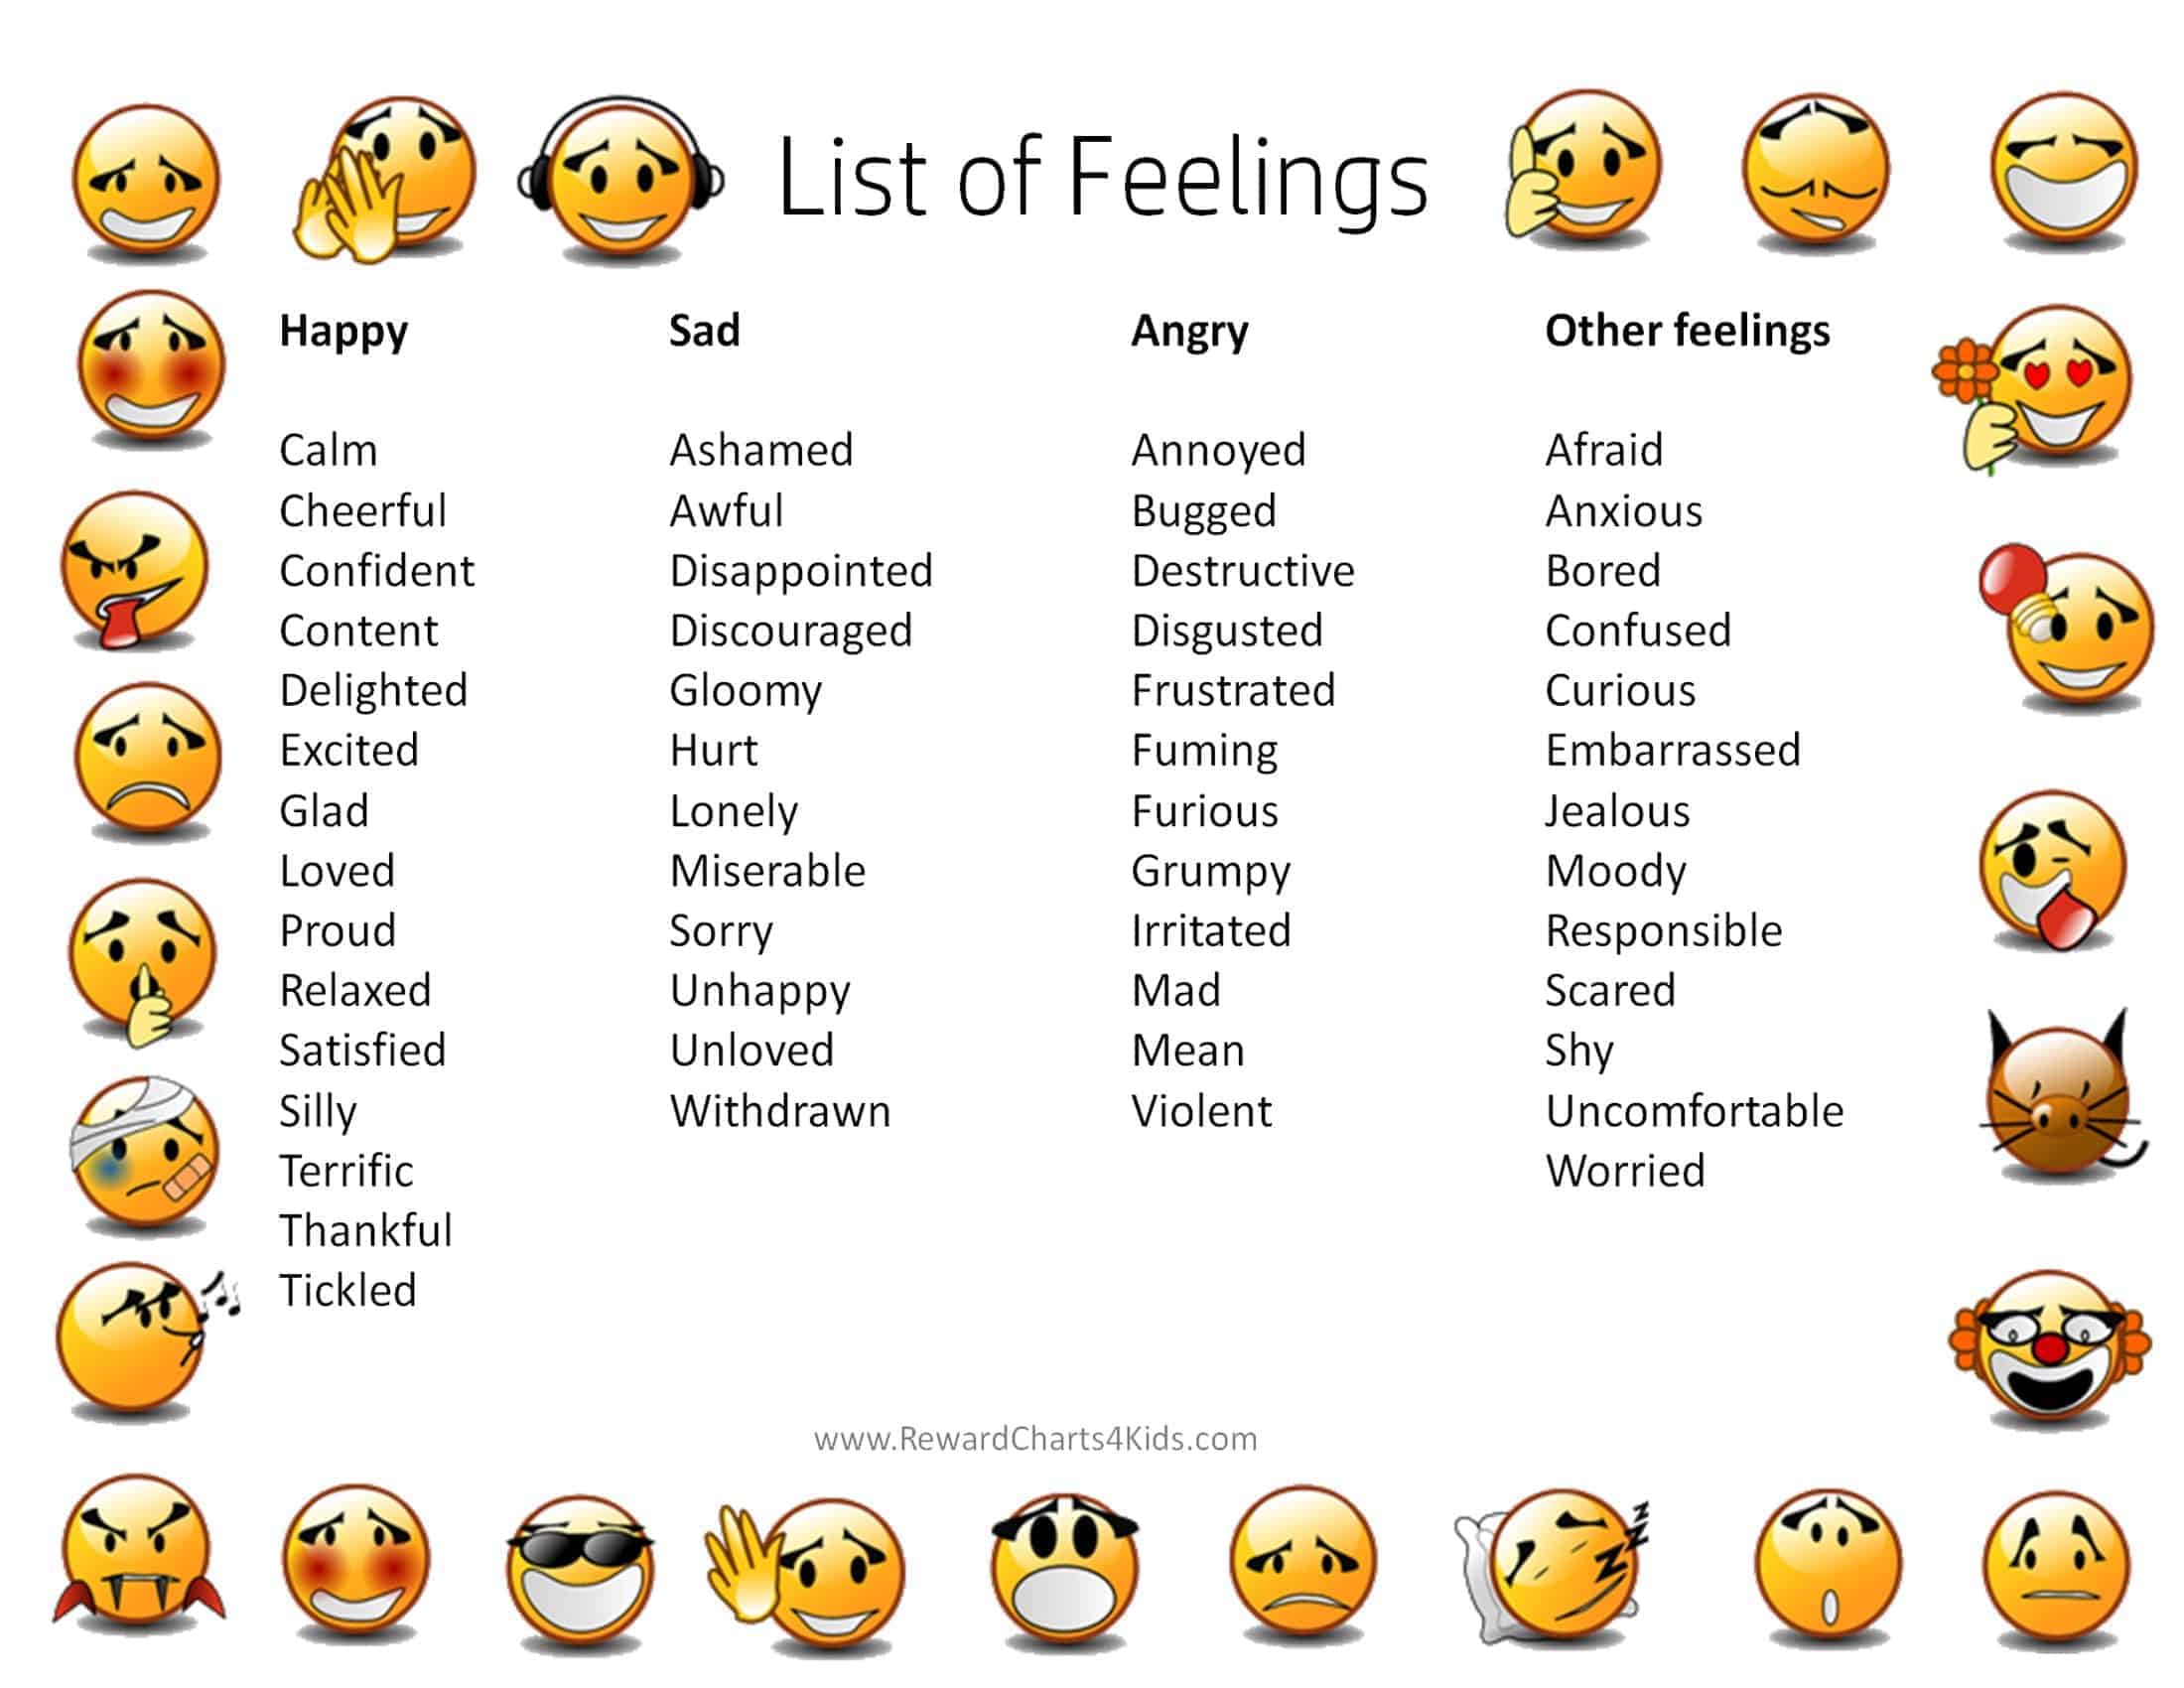 HOW ARE YOU FEELING TODAY 